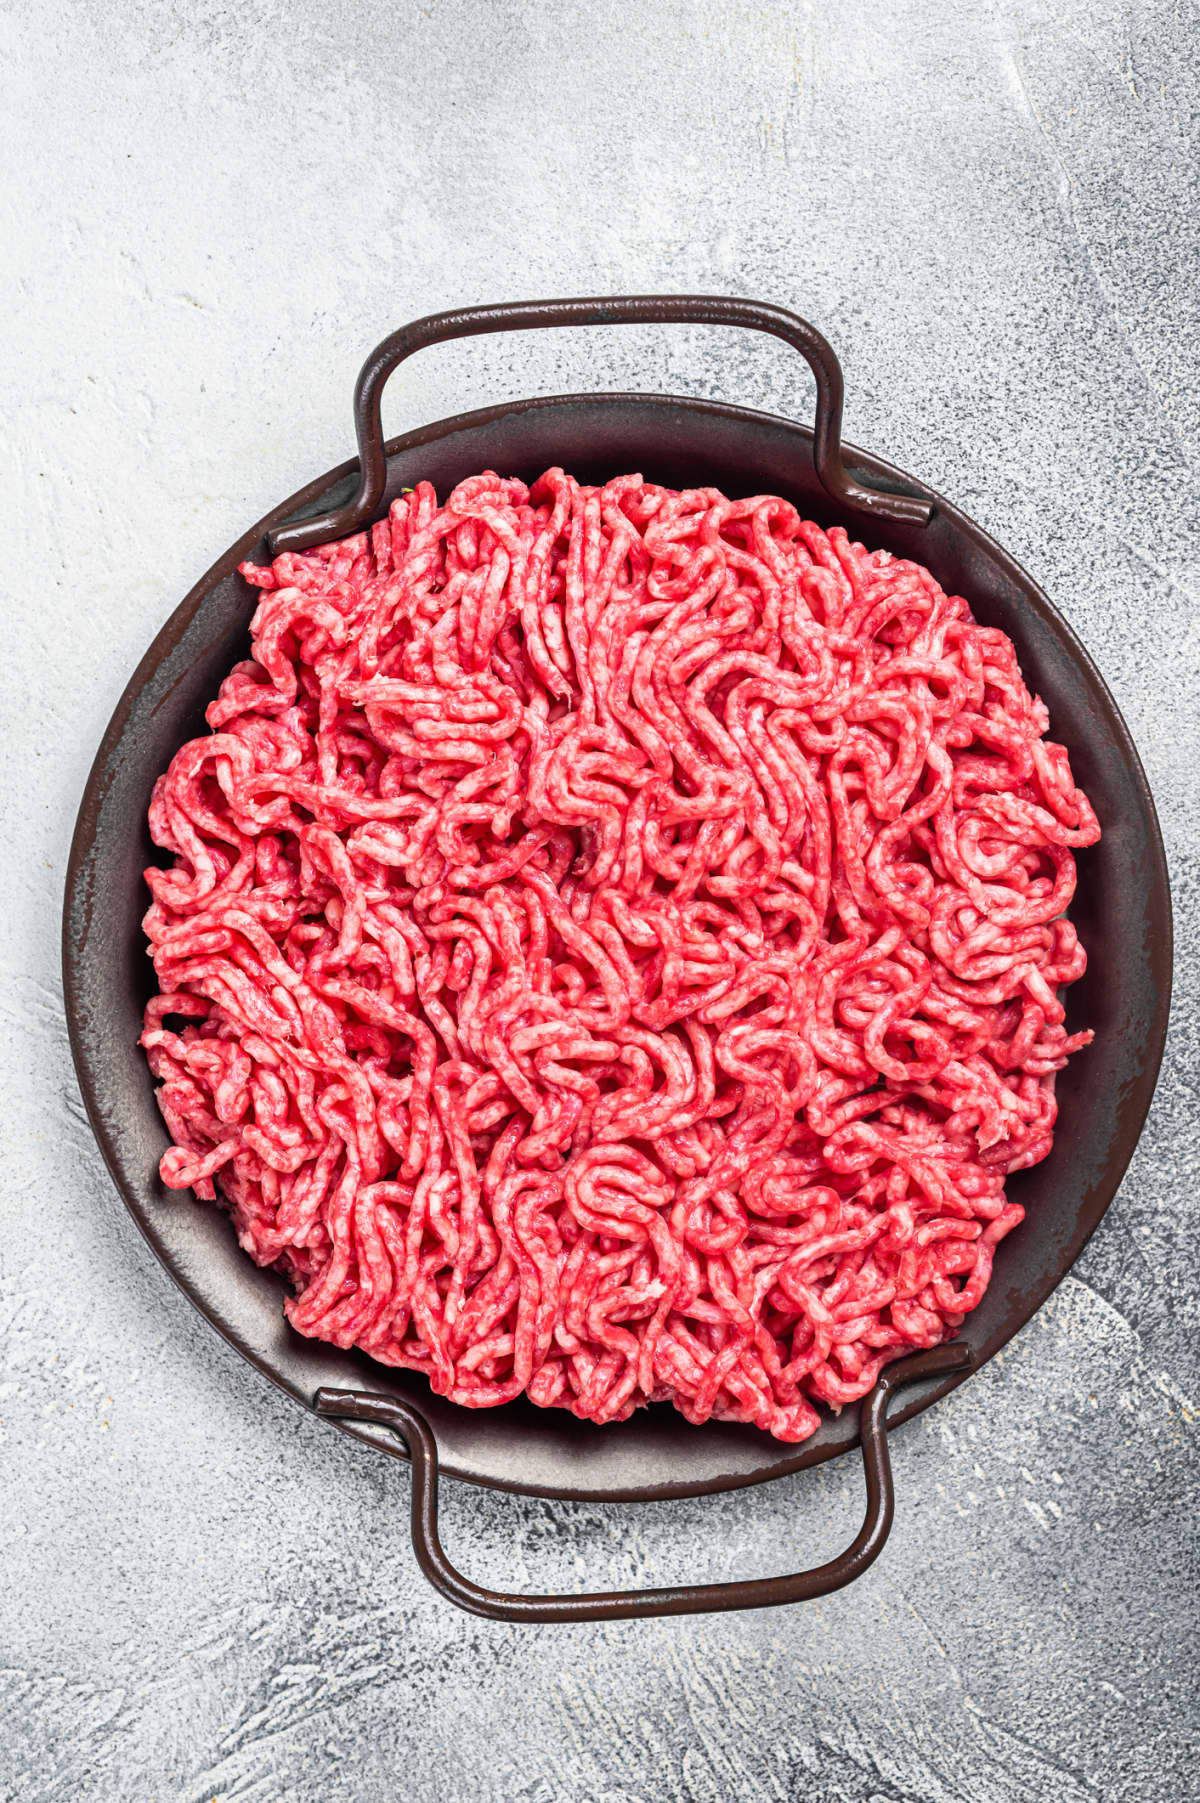 Raw mince ground meat in a kitchen pot